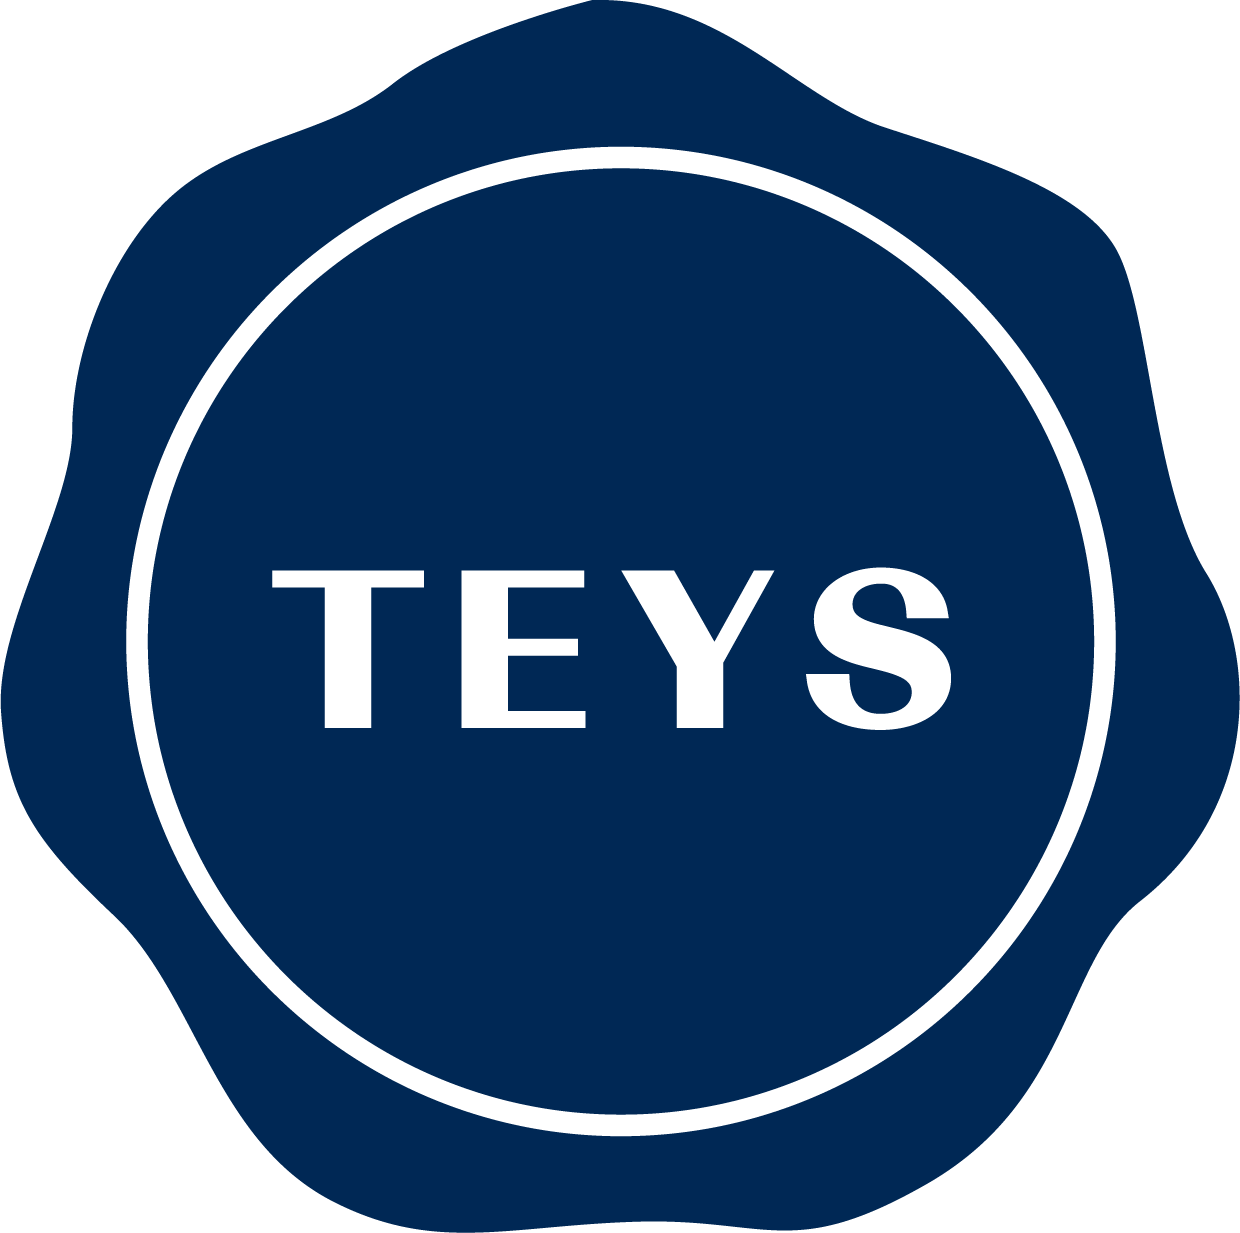 /wp-content/uploads/2018/11/Teys-Rosette-Primary-Navy-2.png